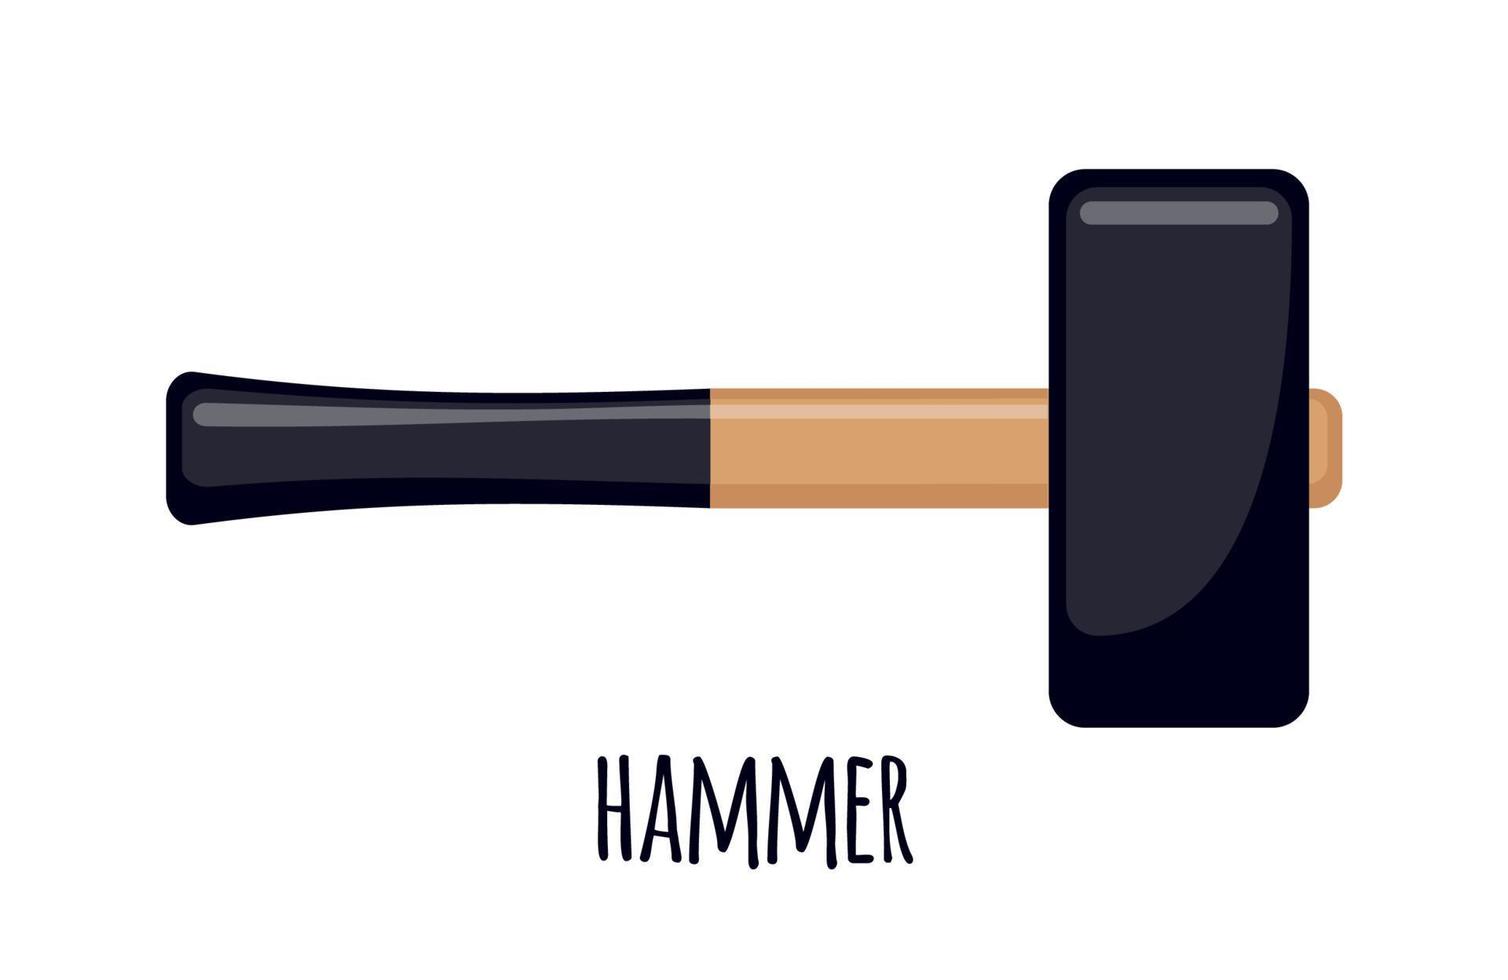 Hammer icon in flat style isolated on white background. Carpenter tool. Vector illustration.